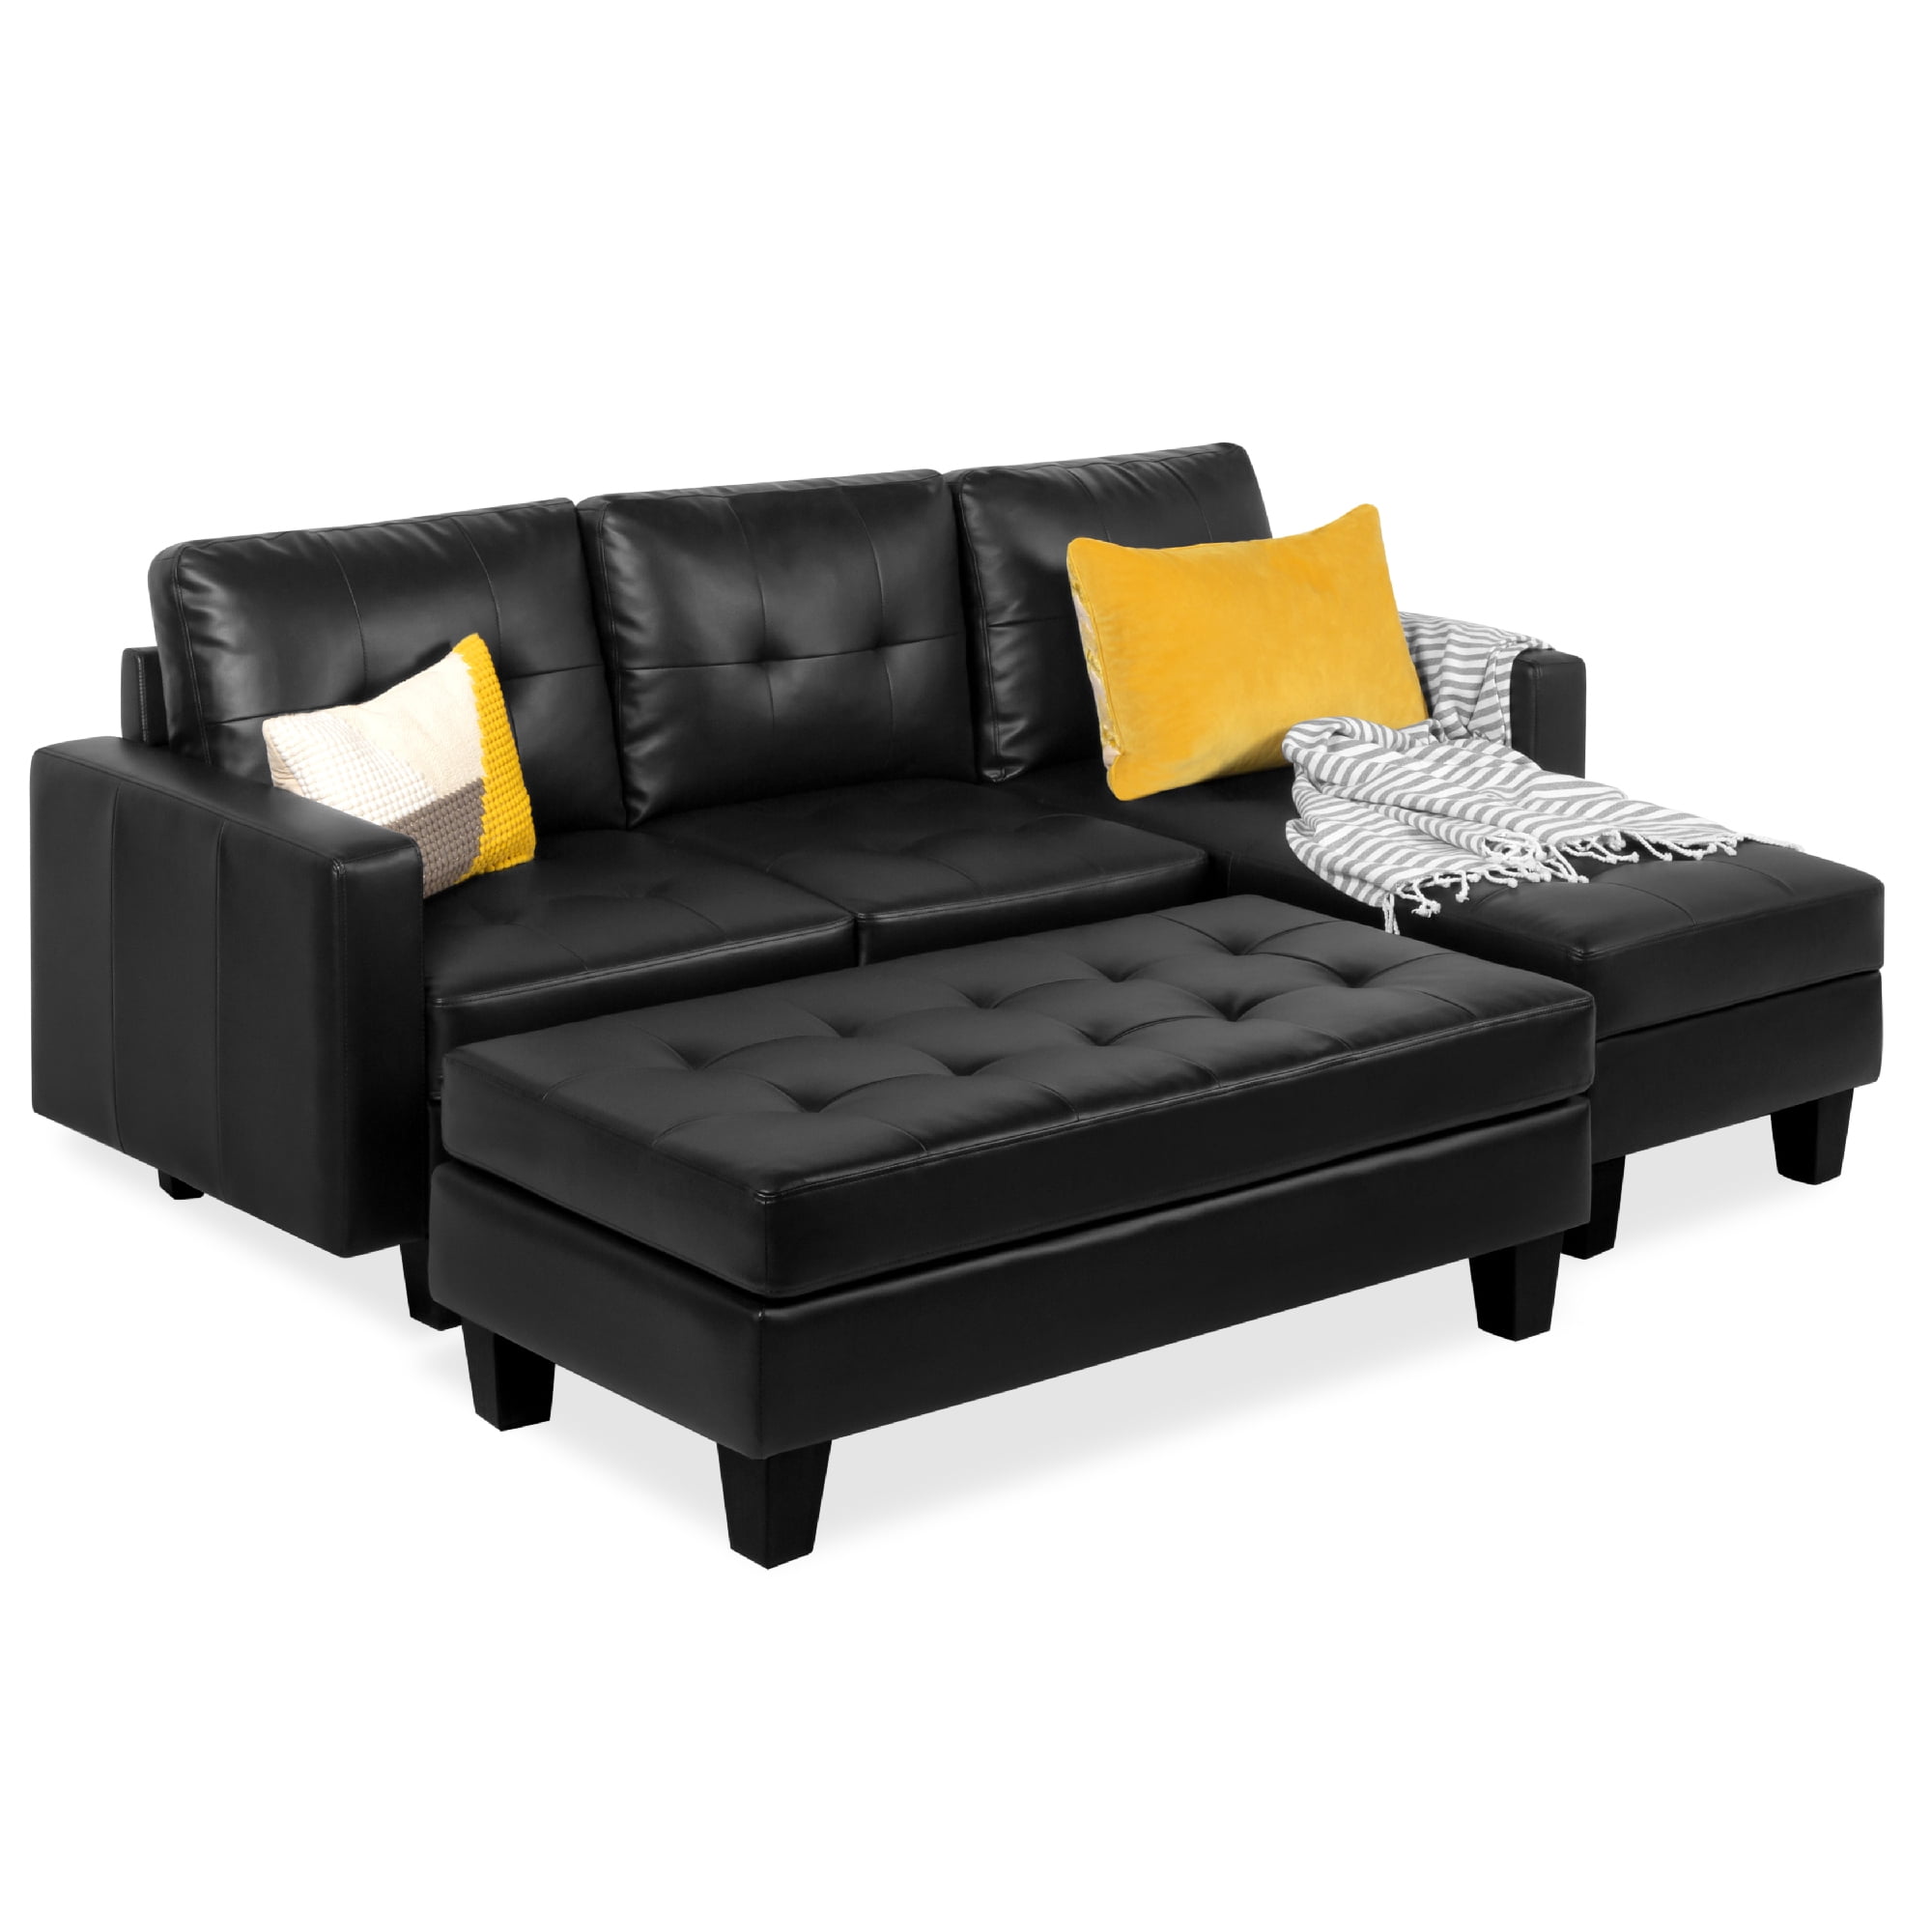 W Chaise Lounge Ottoman Bench Black, Black Leather Couch With Ottoman Bed